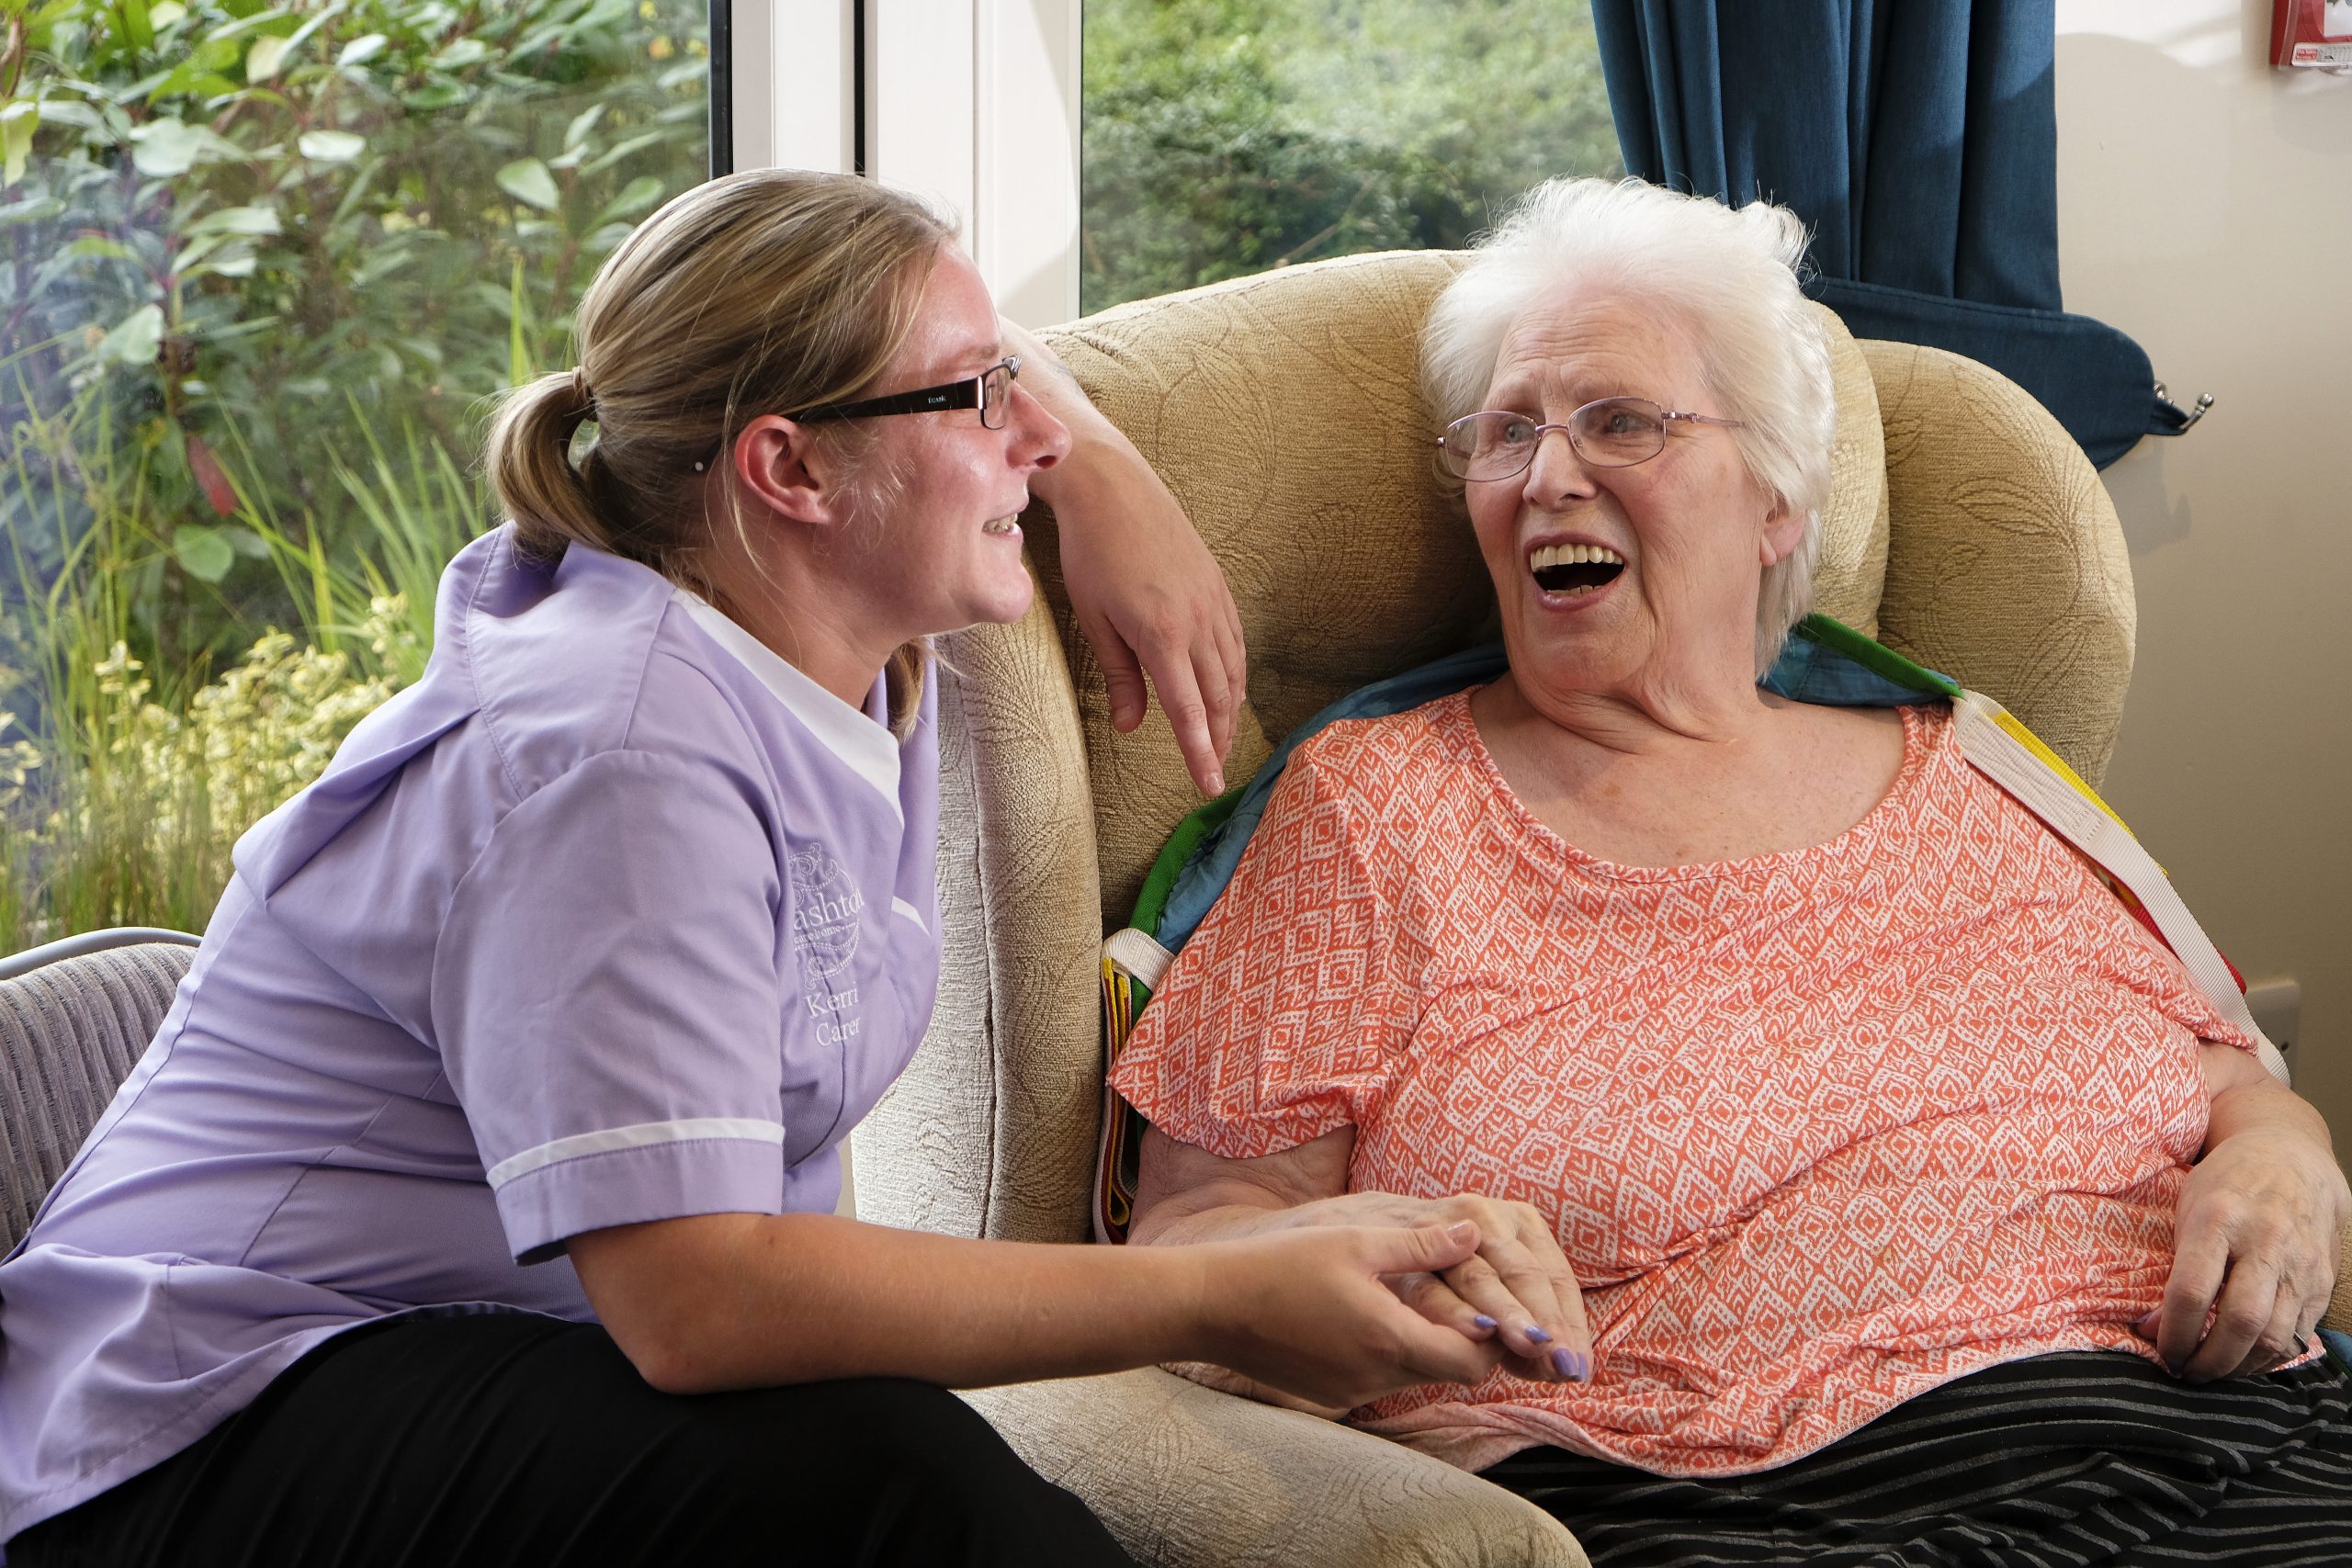 A caregiver wearing purple laughing with a female resident sat in a chair.